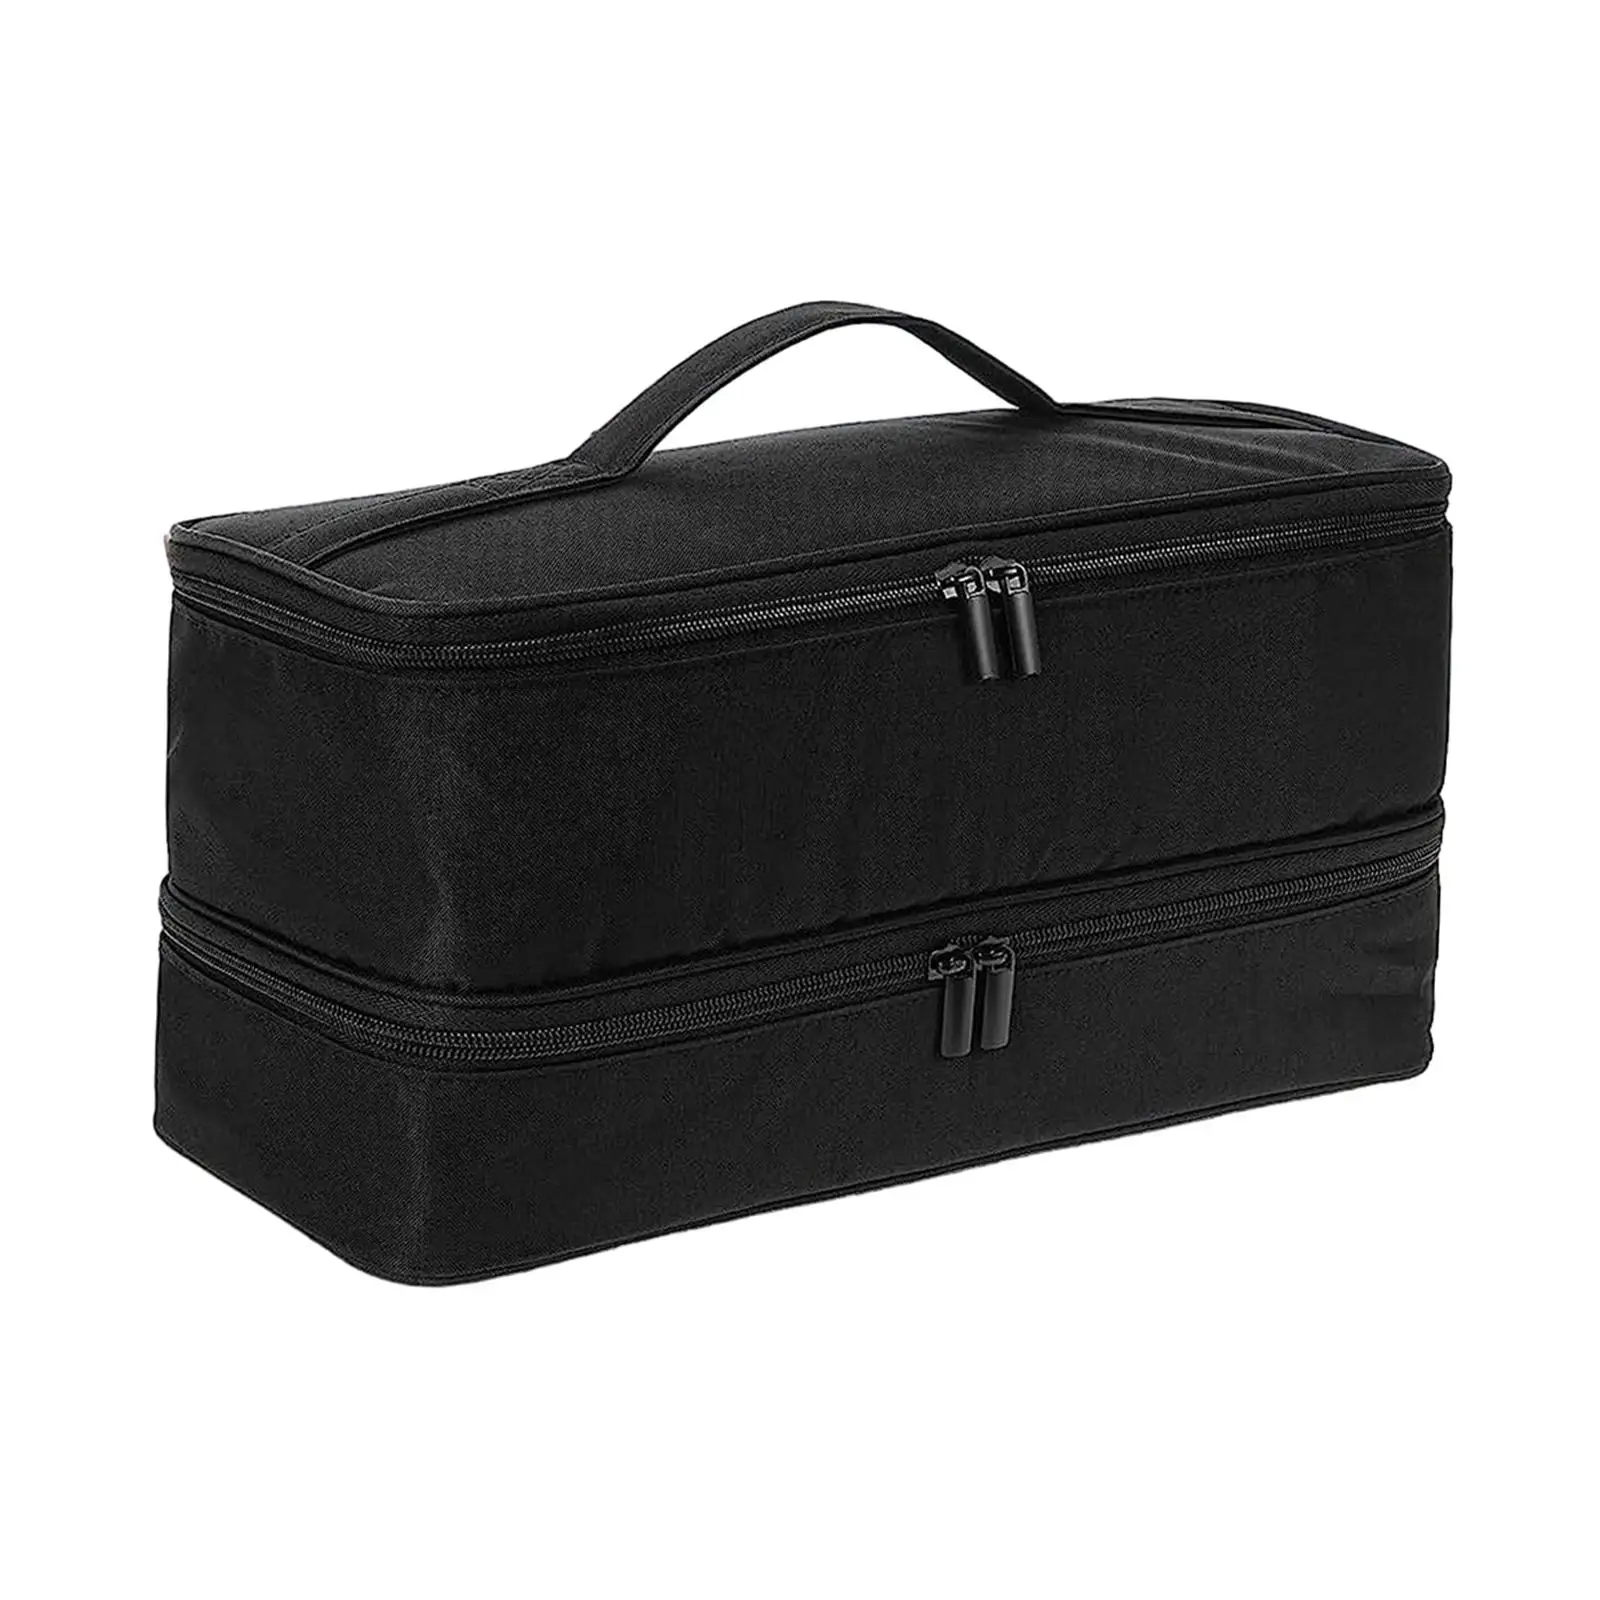 Travel Case Hair Dryer Storage Bag Curling Organizer Bag Large Makeup Case Double Layer Carrying Case for Home, Business Trip